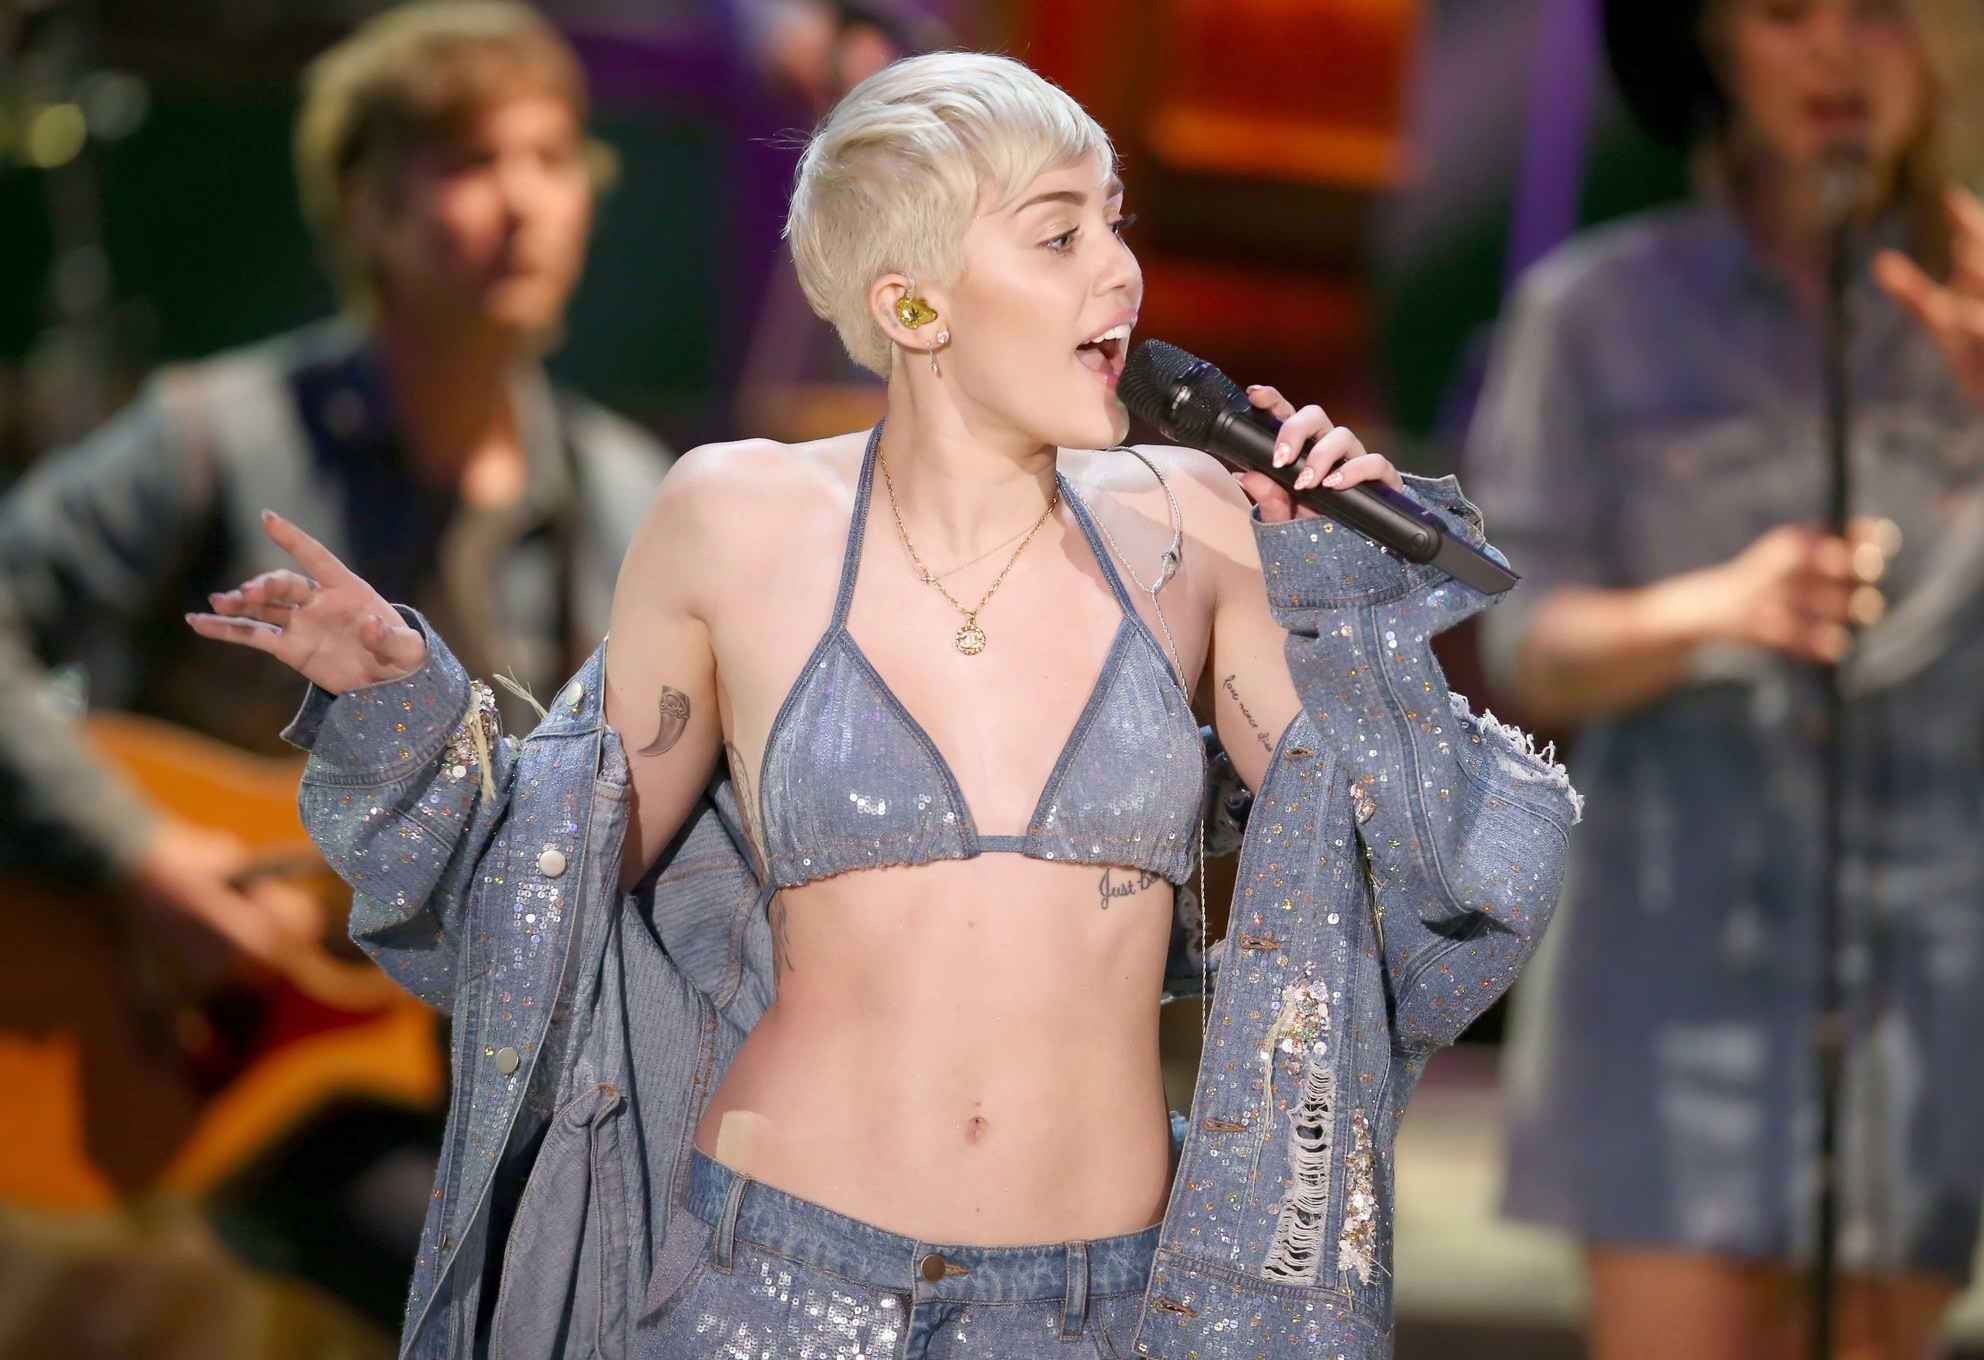 Miley Cyrus perofrming in denim bra  ripped jeans at MTV Unplugged in Hollywood  #75205907